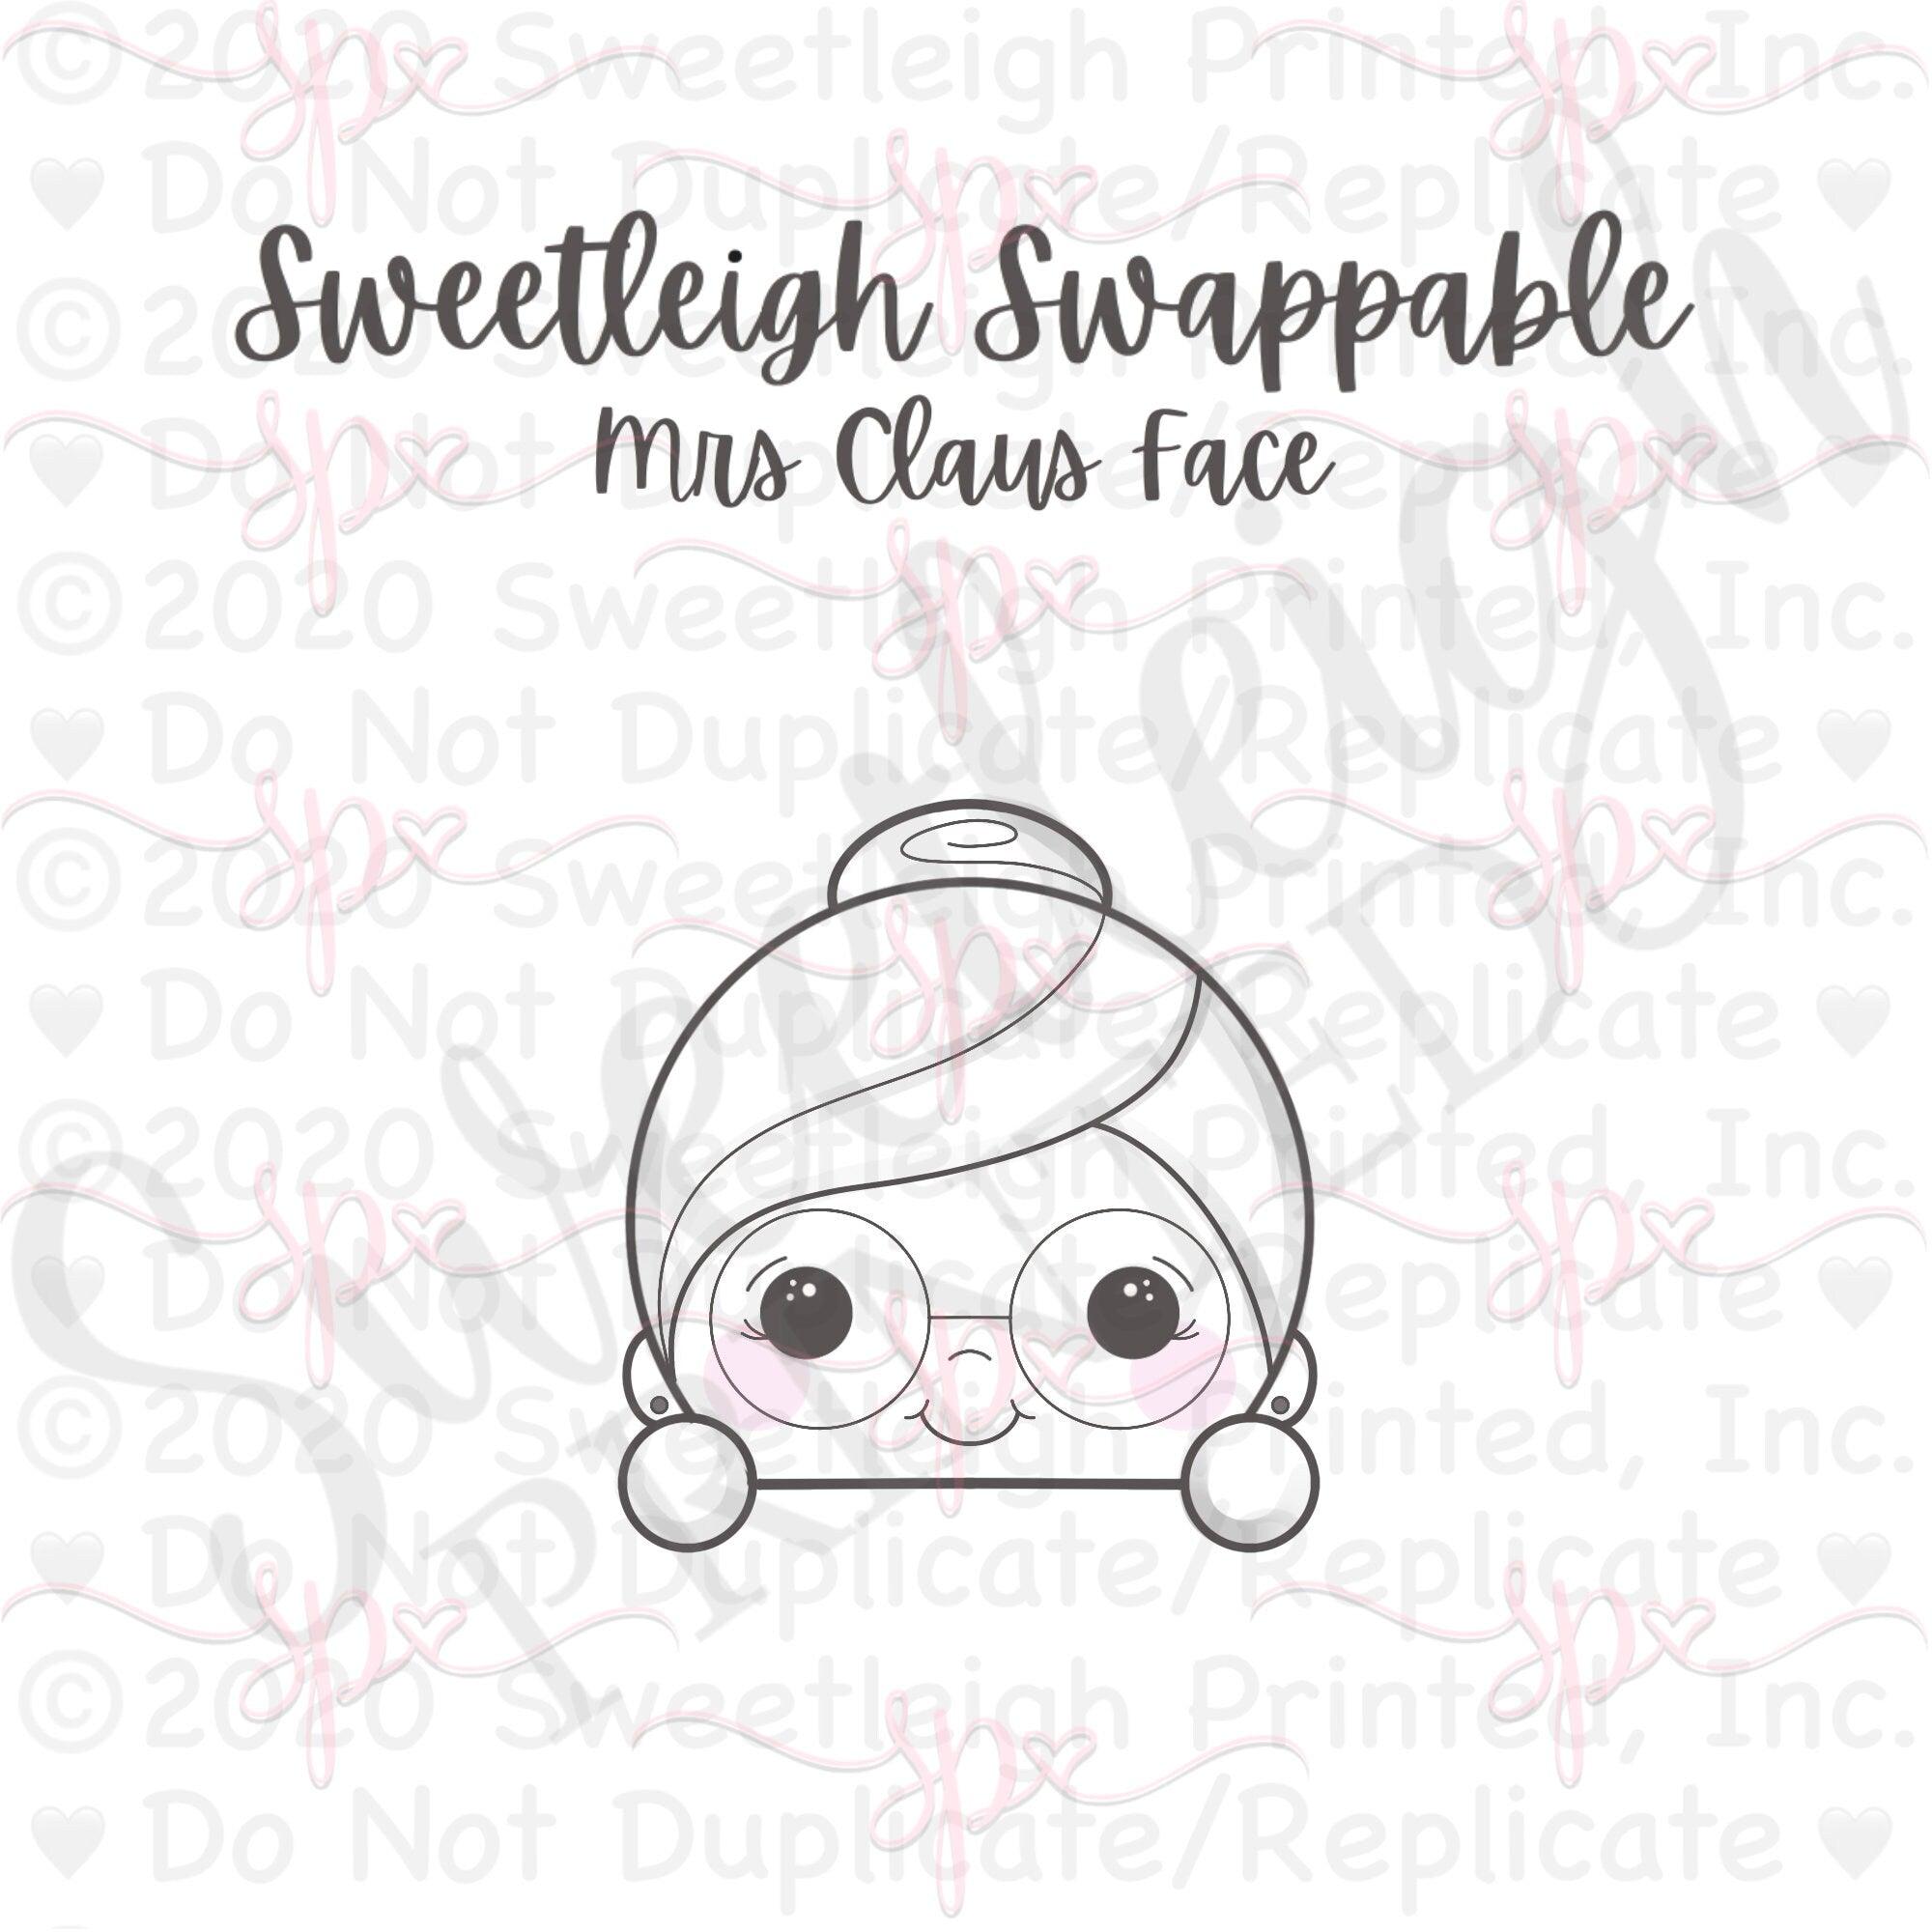 Sweetleigh Swappable Mrs. Claus Face Cookie Cutter - Sweetleigh 